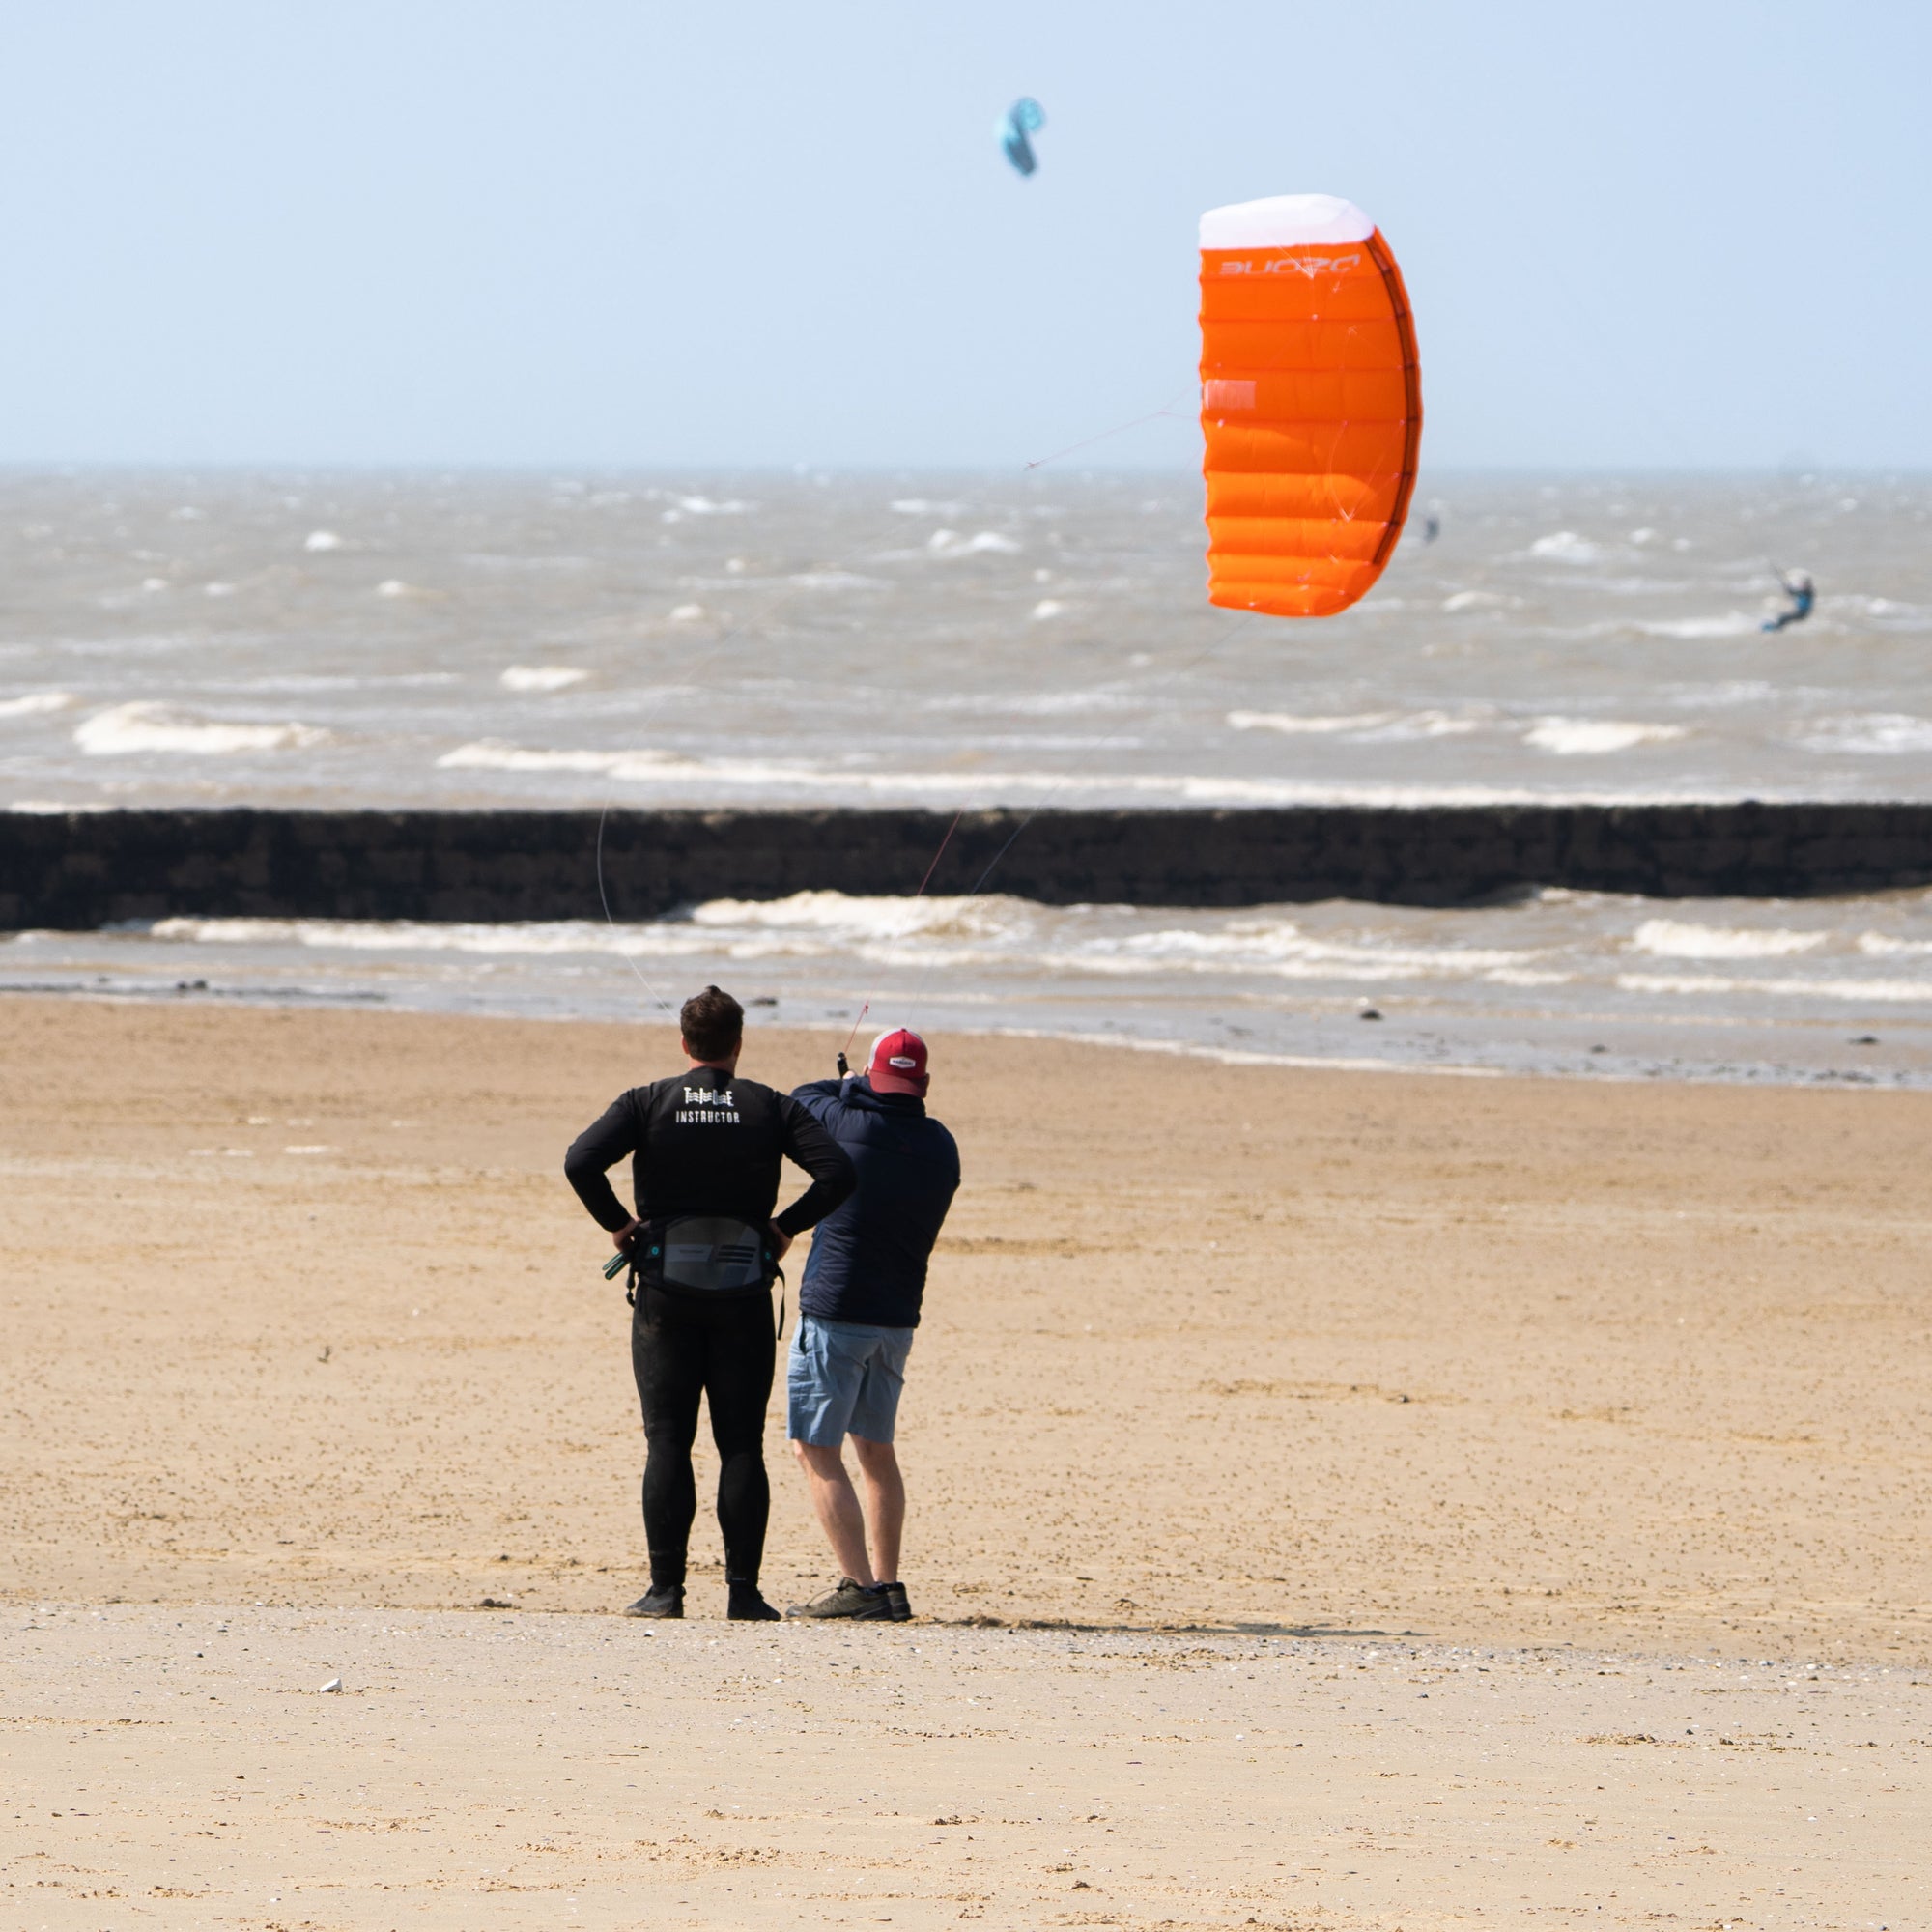 Kitesurfing taster lesson in progress on the golden sand beach of Minnis Bay near Margate, Kent. The instructor is flying an orange Ozone Ignition trainer kite to show them how to fly it in the wind window.